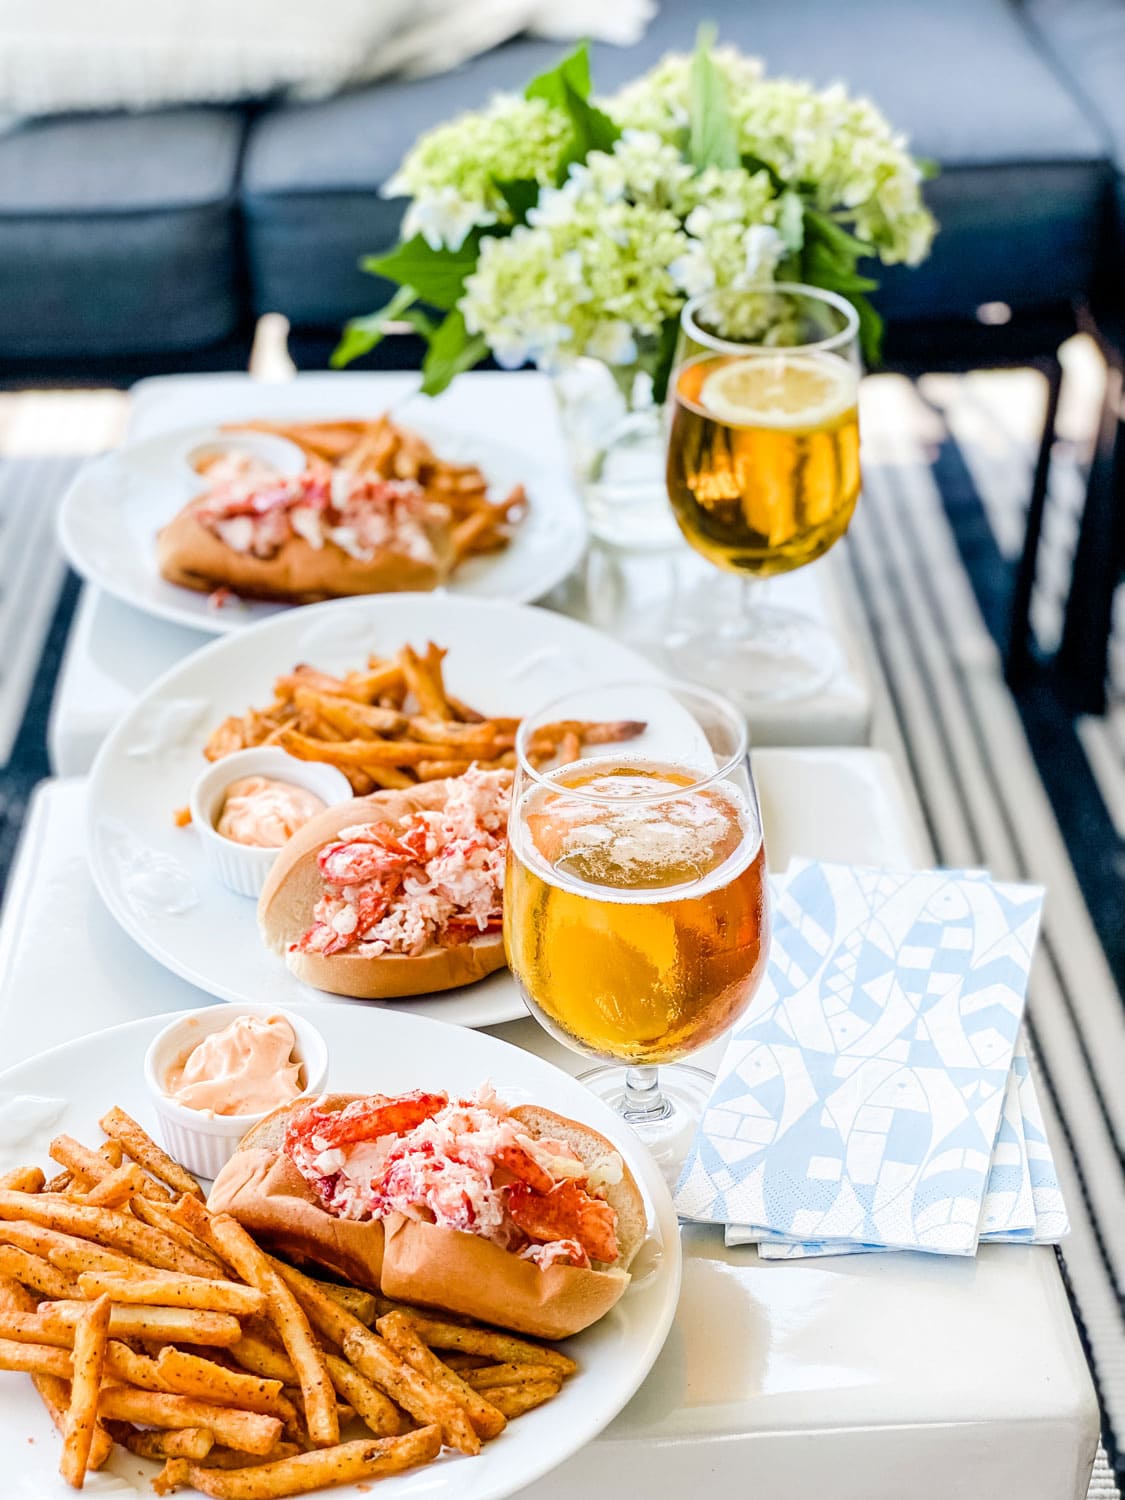 This is the best recipe for the simplest, most delicious lobster roll just like the one you had at Red Hook Lobster in Rockaway Beach or Manhattan!